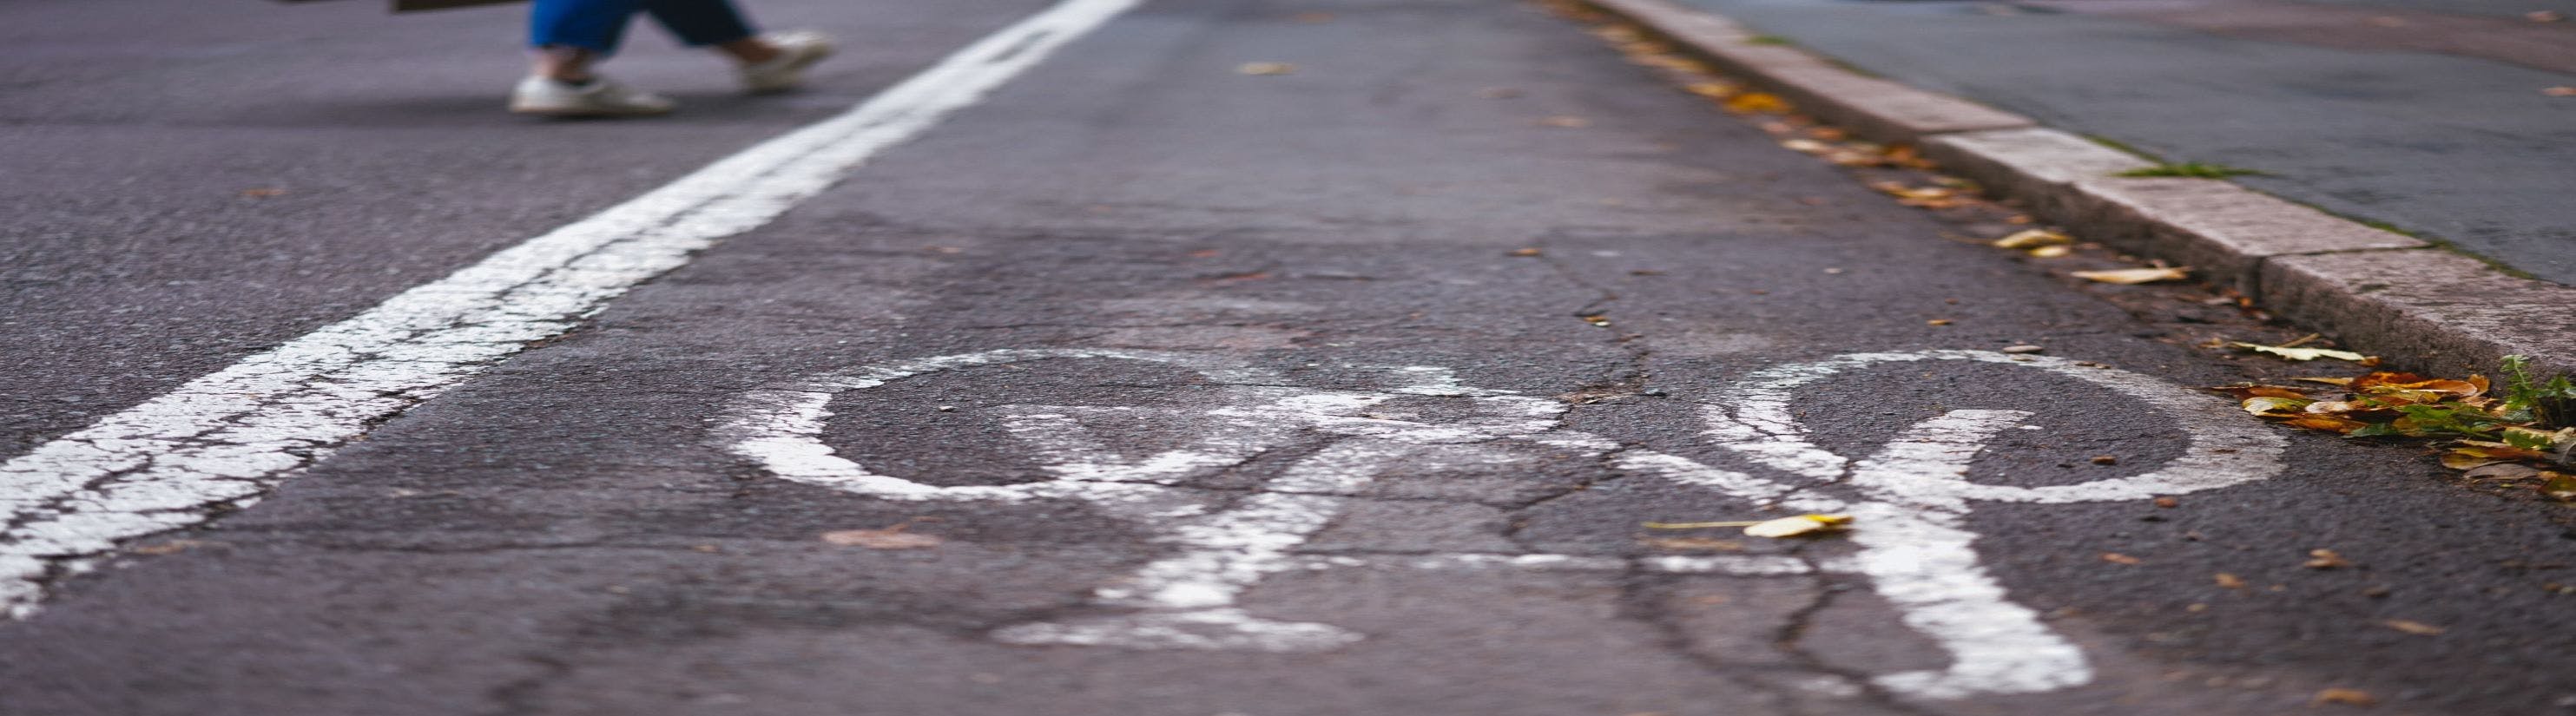 Photo of cycle lane with painted pedal cycle symbol.